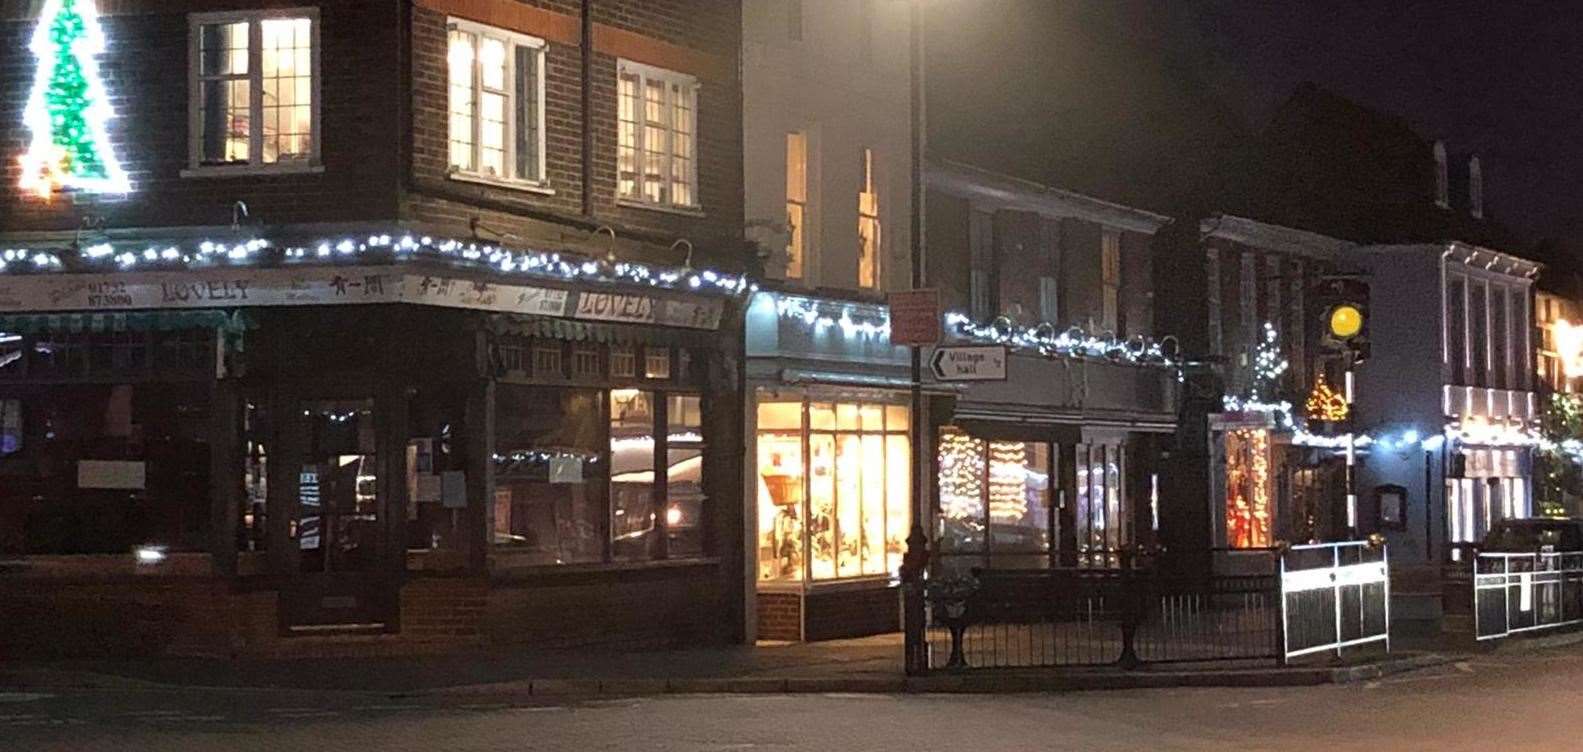 The town centre has been brightened up with festive lights